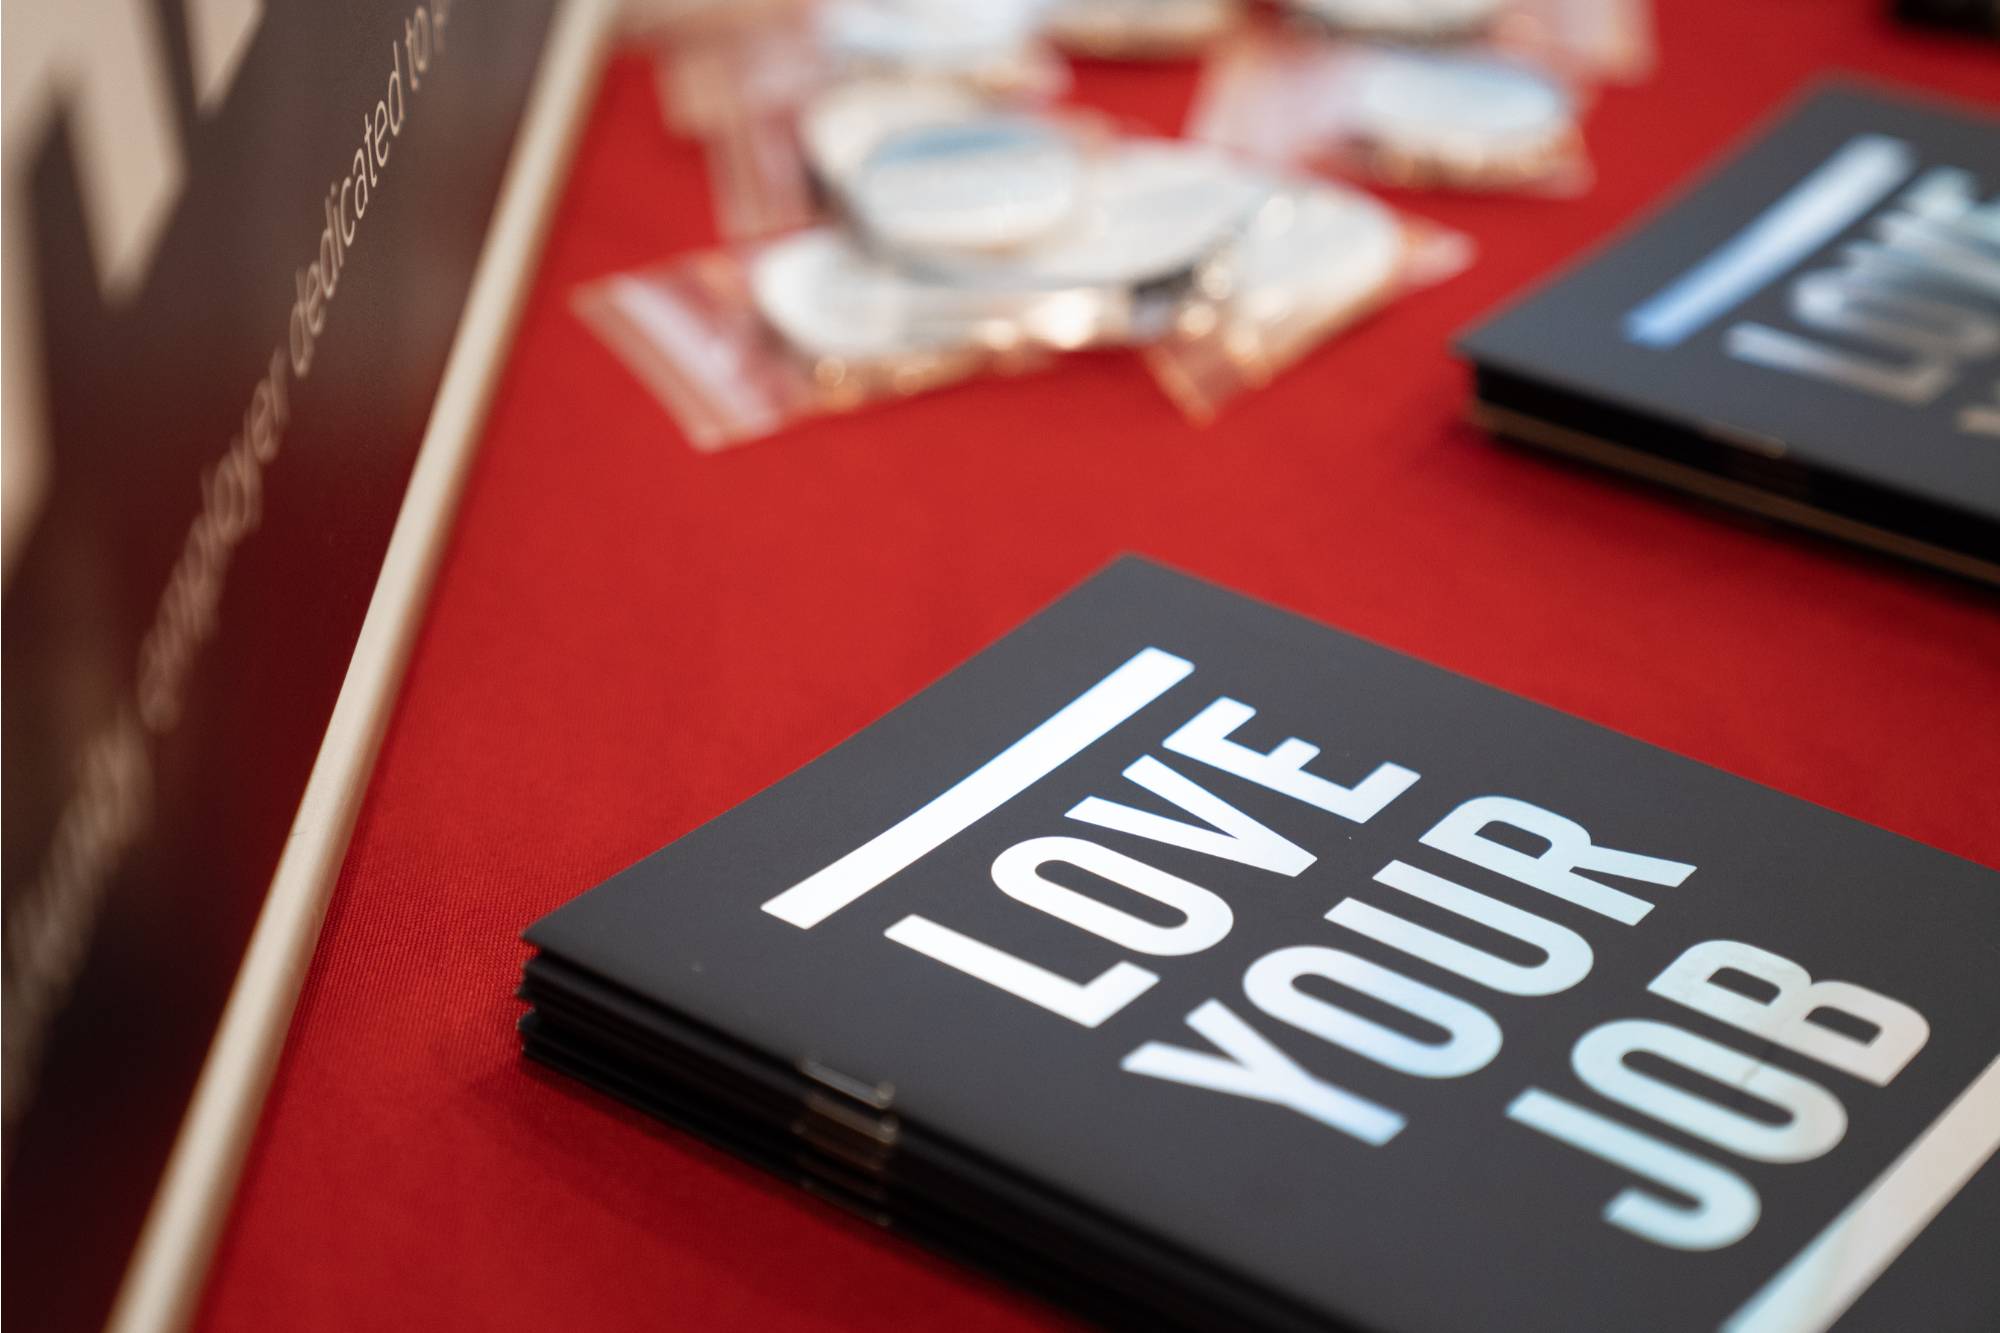 A black and white book saying "Love your job" on a red table cloth